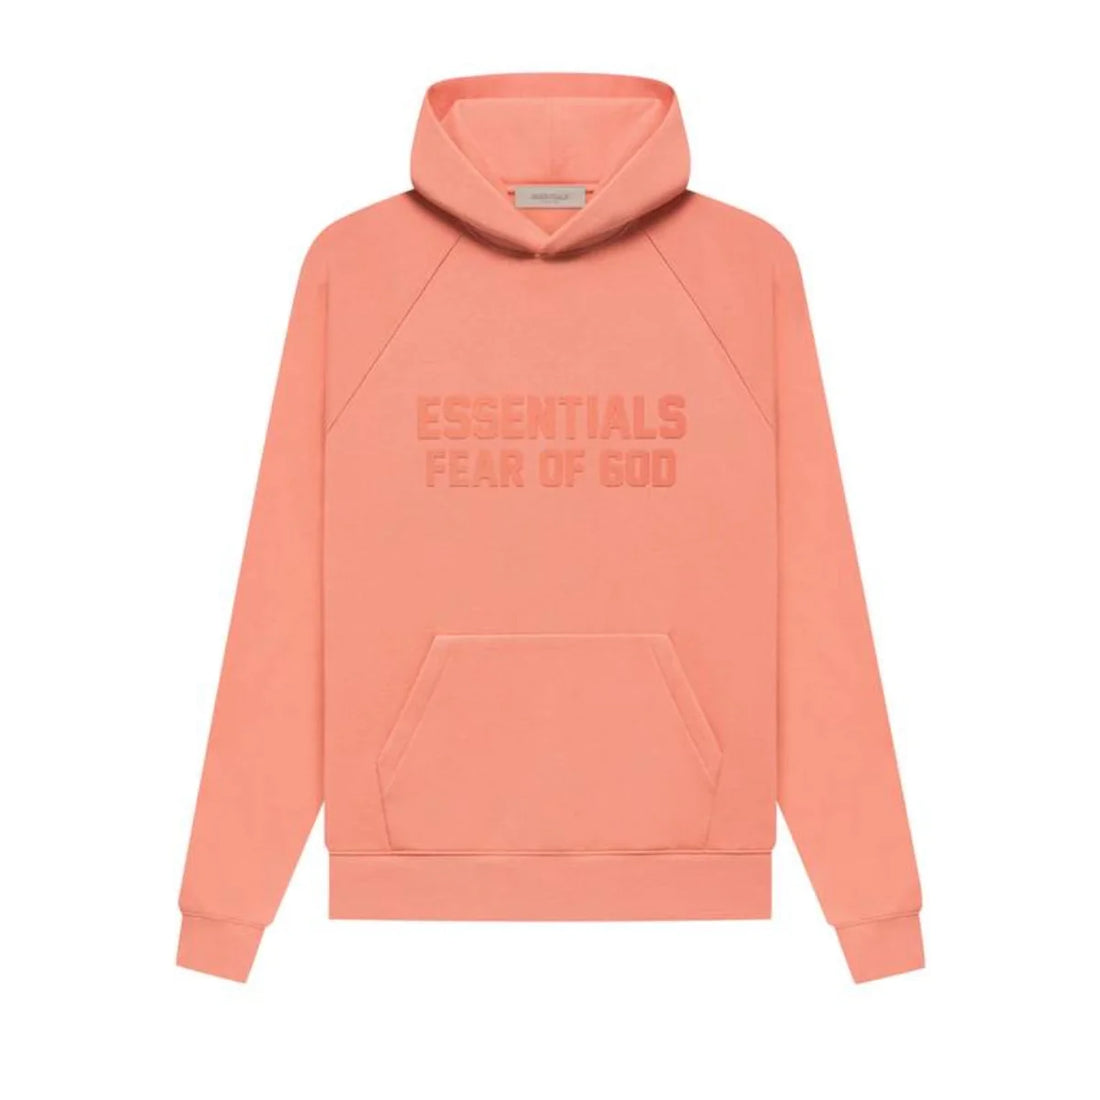 FEAR OF GOD ESSENTIALS CORAL HOODIE